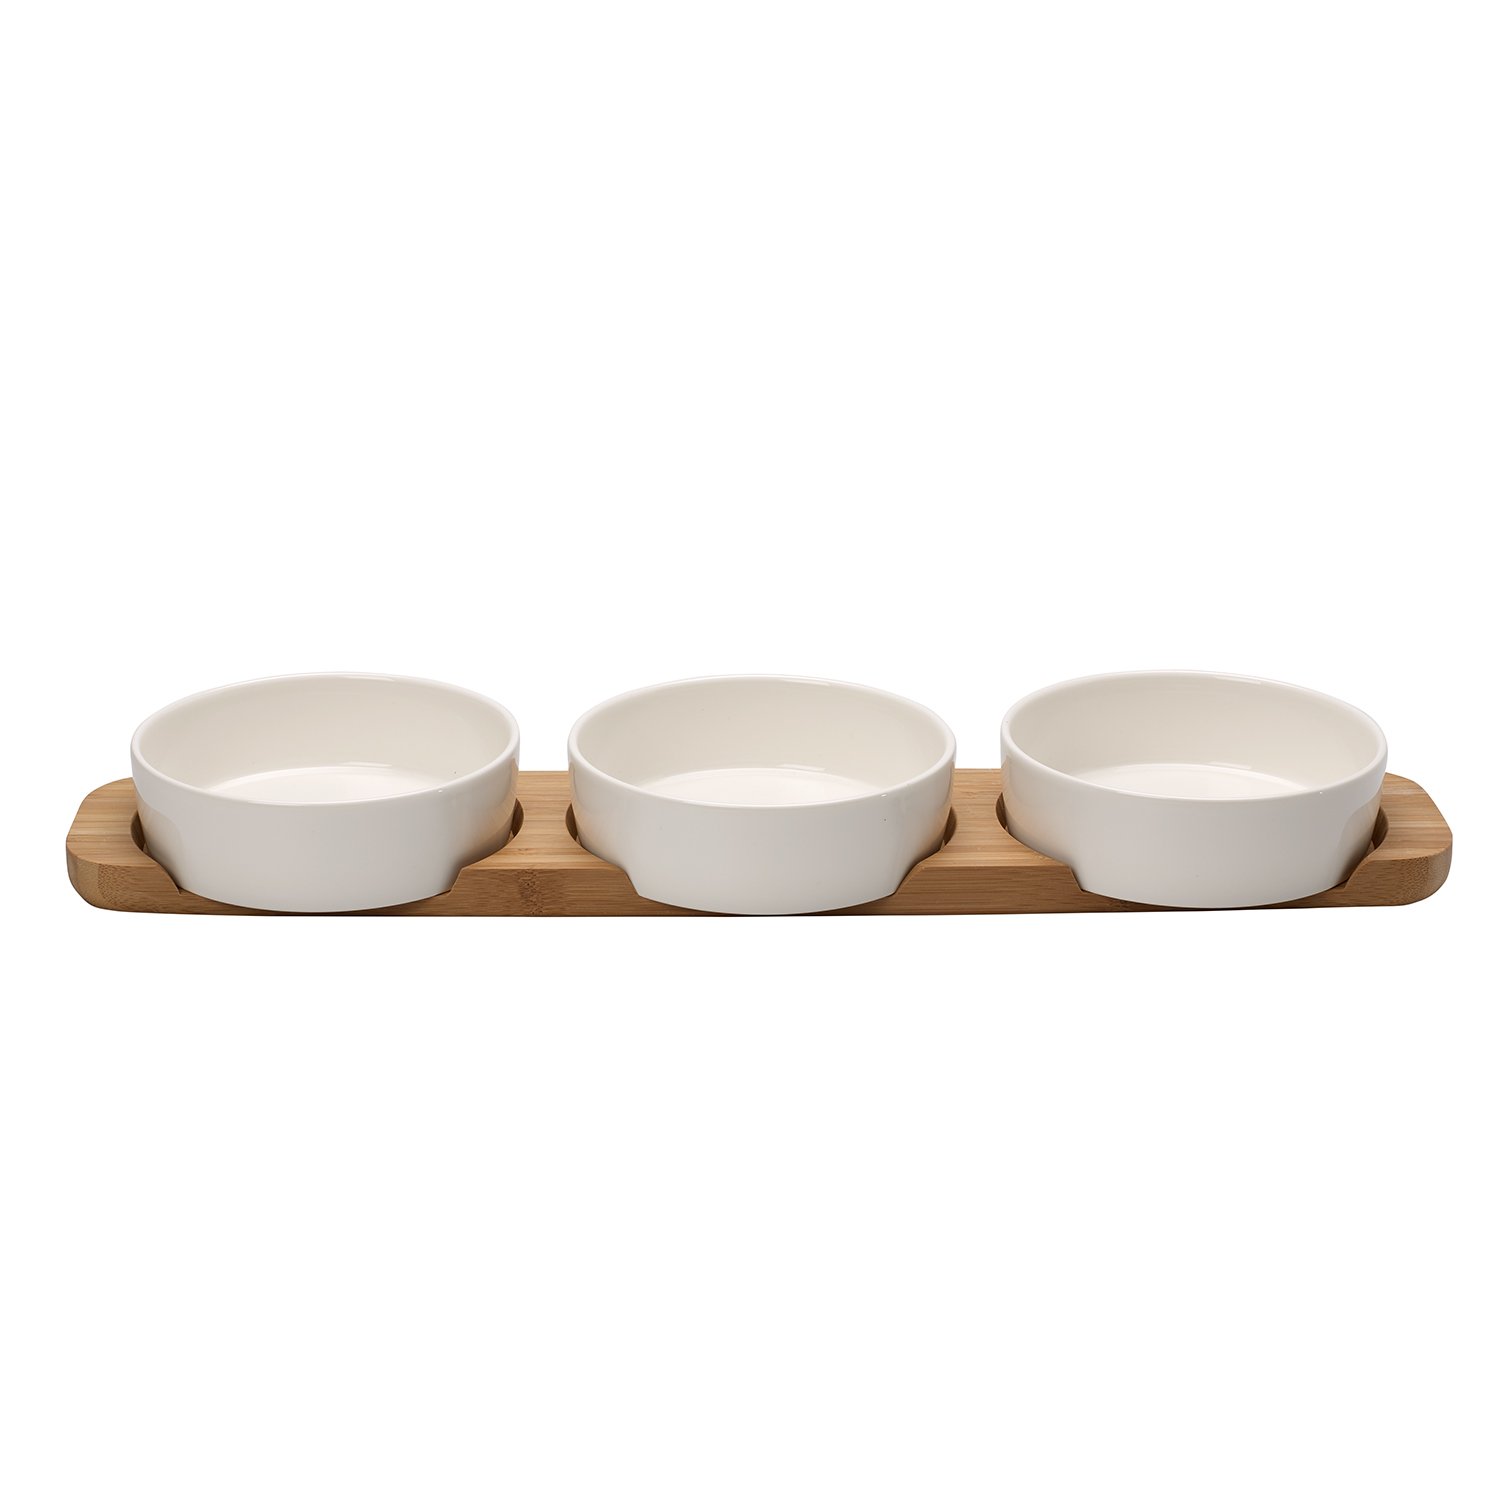 Pizza Passion 4 Piece Topping Bowl Set by Villeroy & Boch - Premium Porcelain - Made in Germany - Dishwasher and Microwave Safe Bowls - 18.75 x 4.25 x 2 Inches White